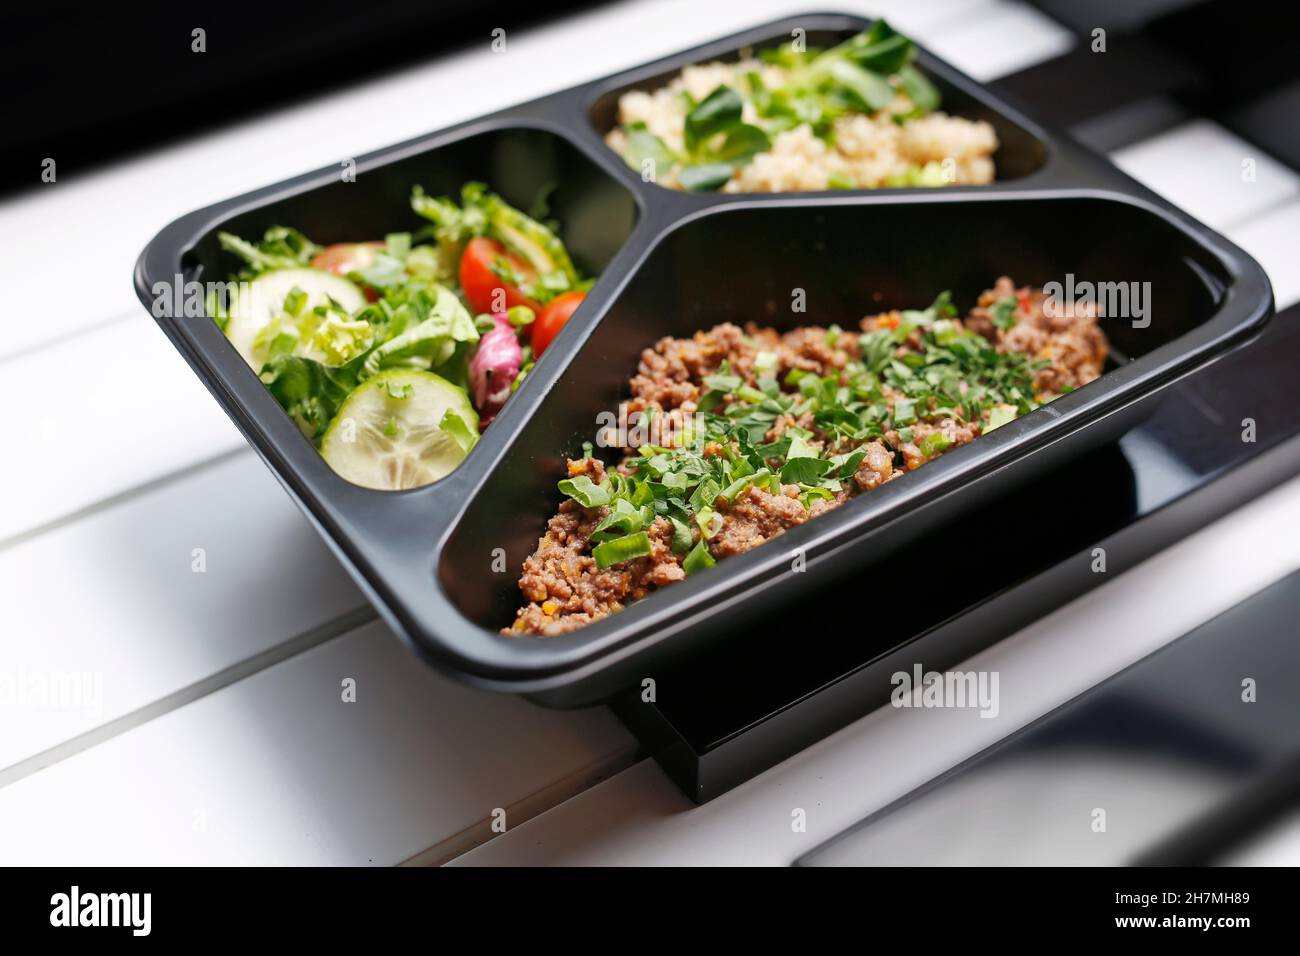 Box diet, appetizing take-away lunch. Appetizing ready-to-go dish served in a disposable box. Culinary photography. Food background. Stock Photo